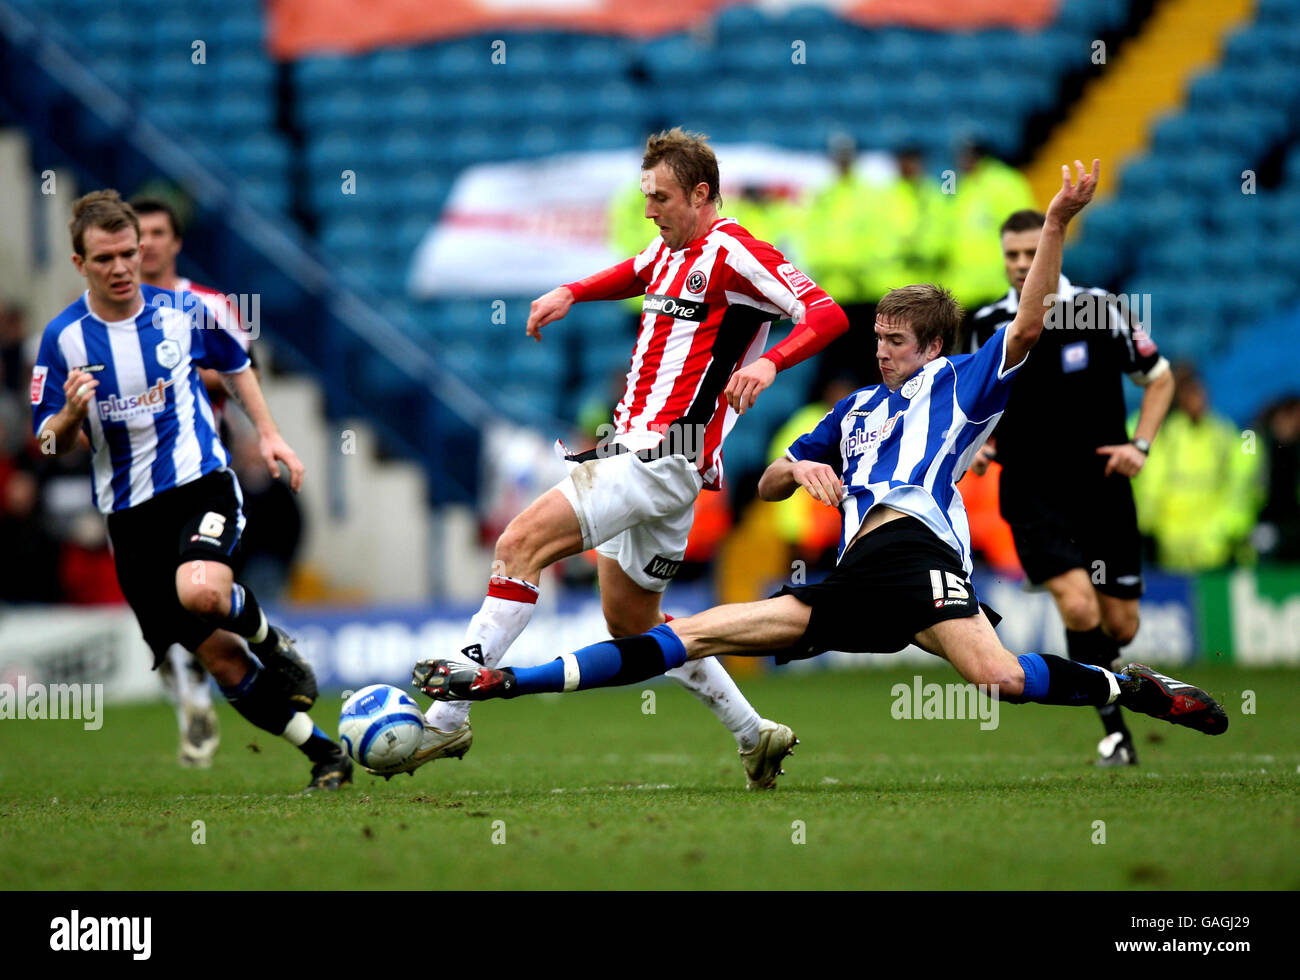 Sheffield United's Rob Hulse is tackled by Sheffield Wednesday's Mark Beevers during the Coca-Cola Championship match at Hillsborough, Sheffield. Stock Photo